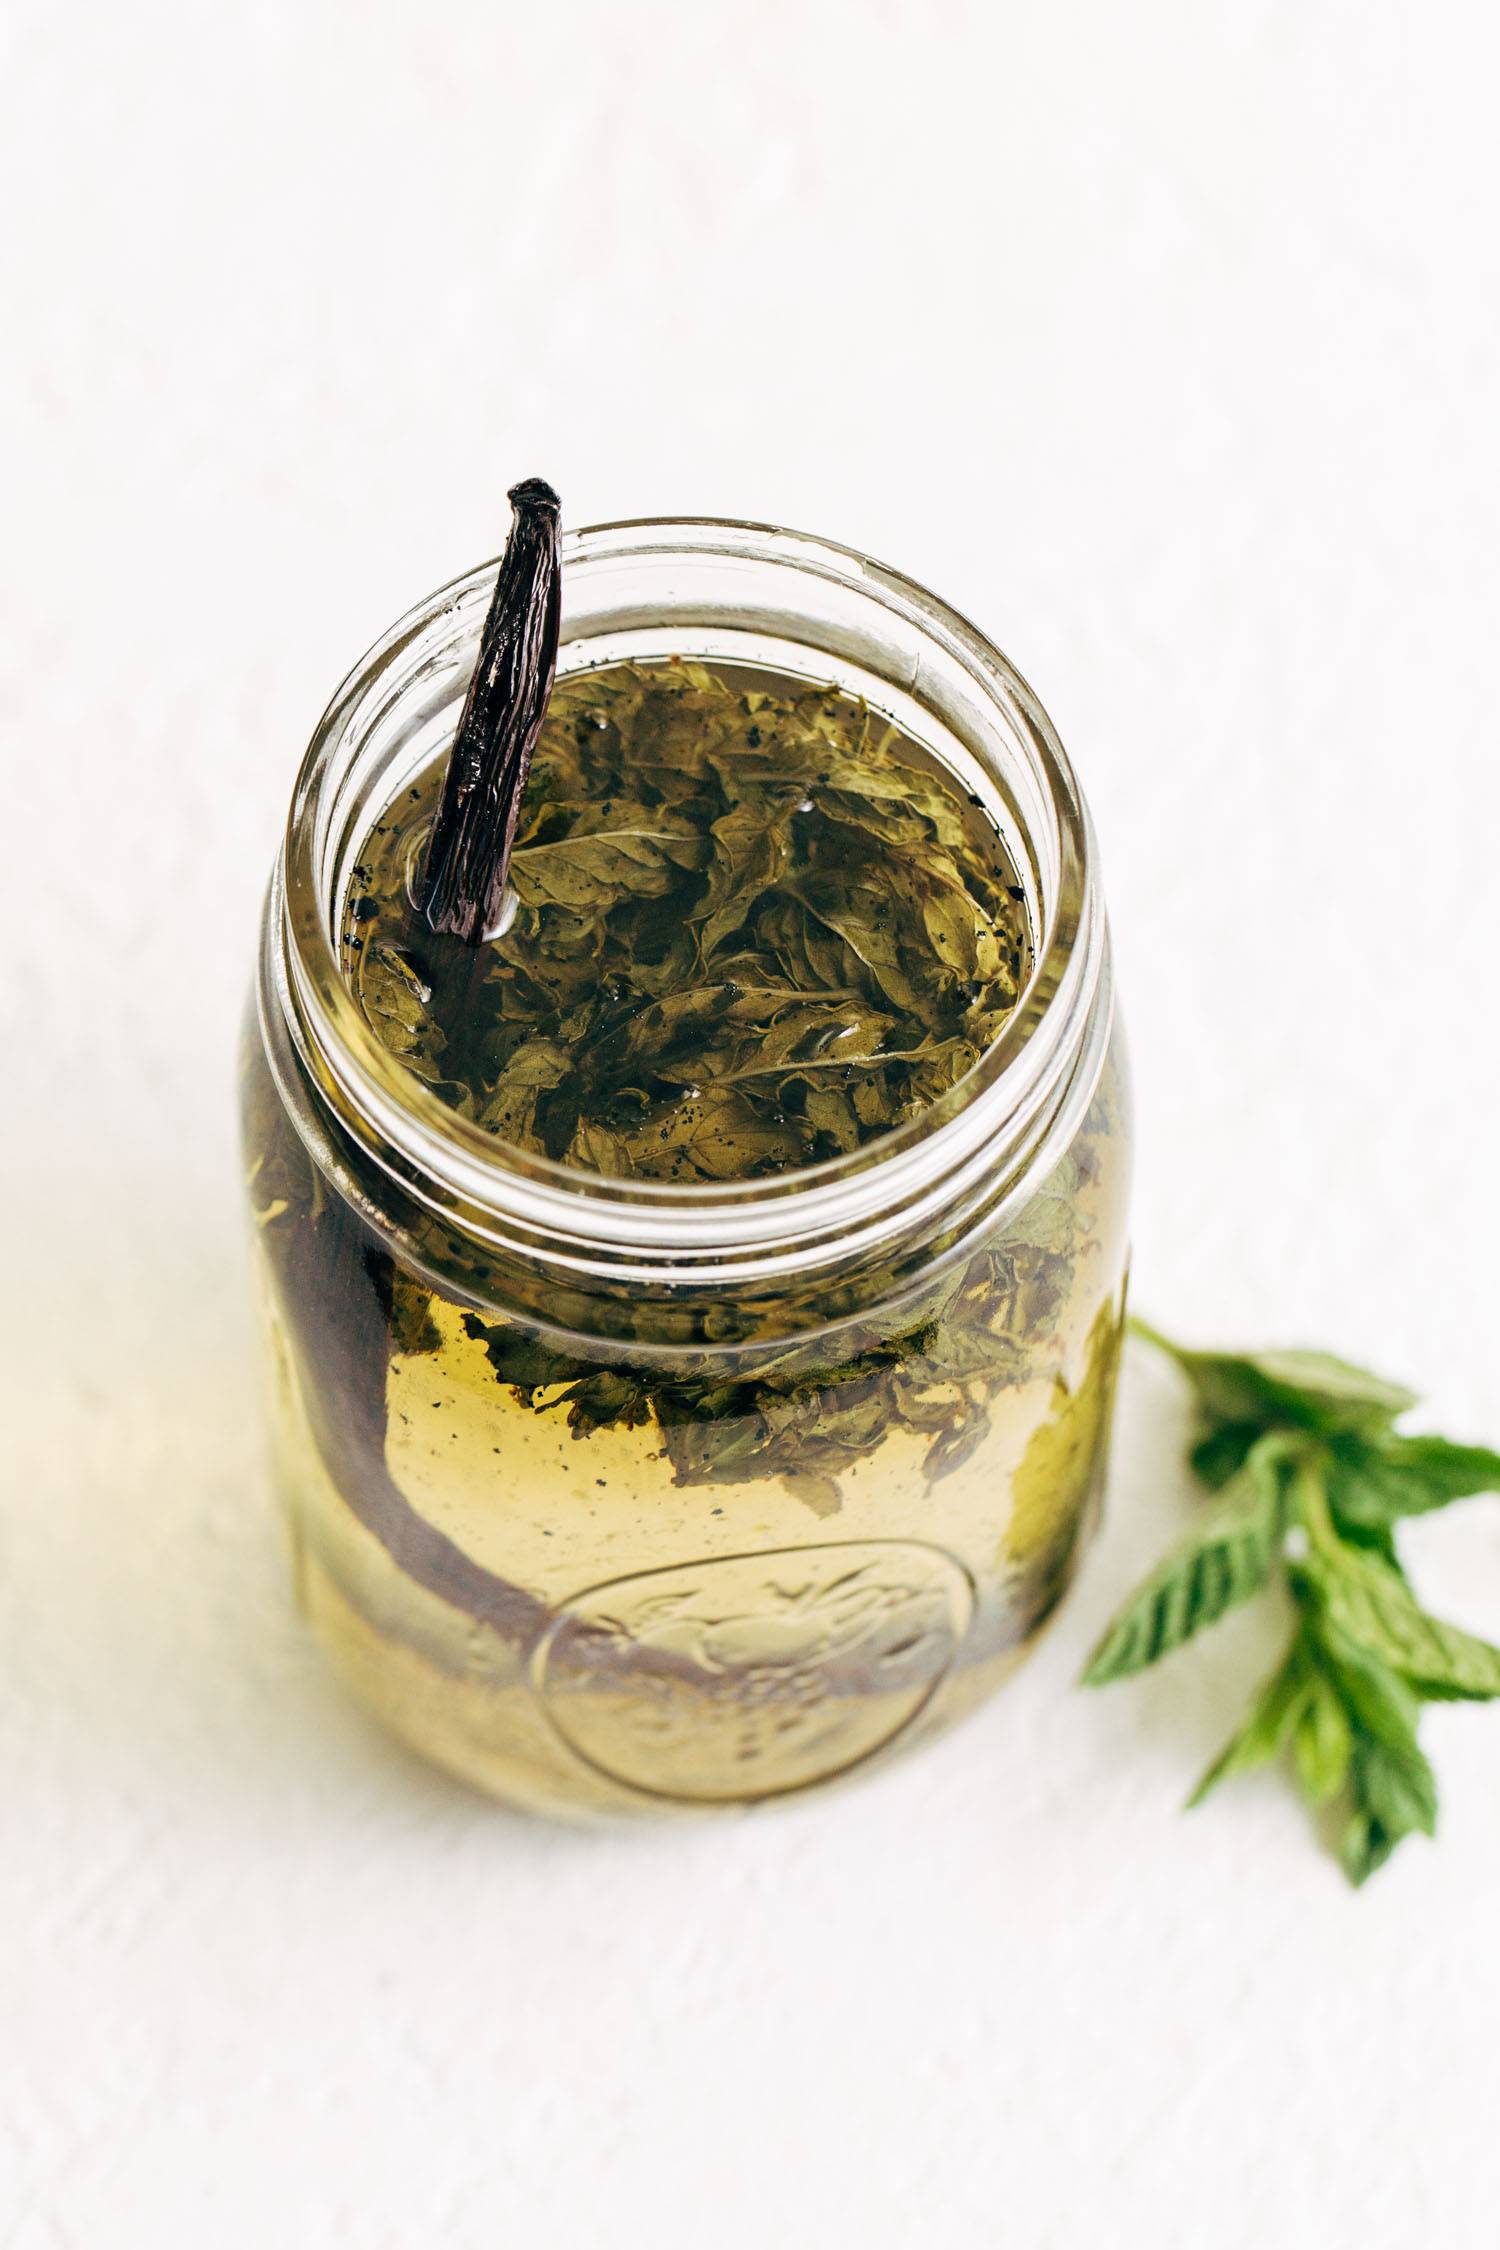 Vanilla mint syrup mixed together in a jar.